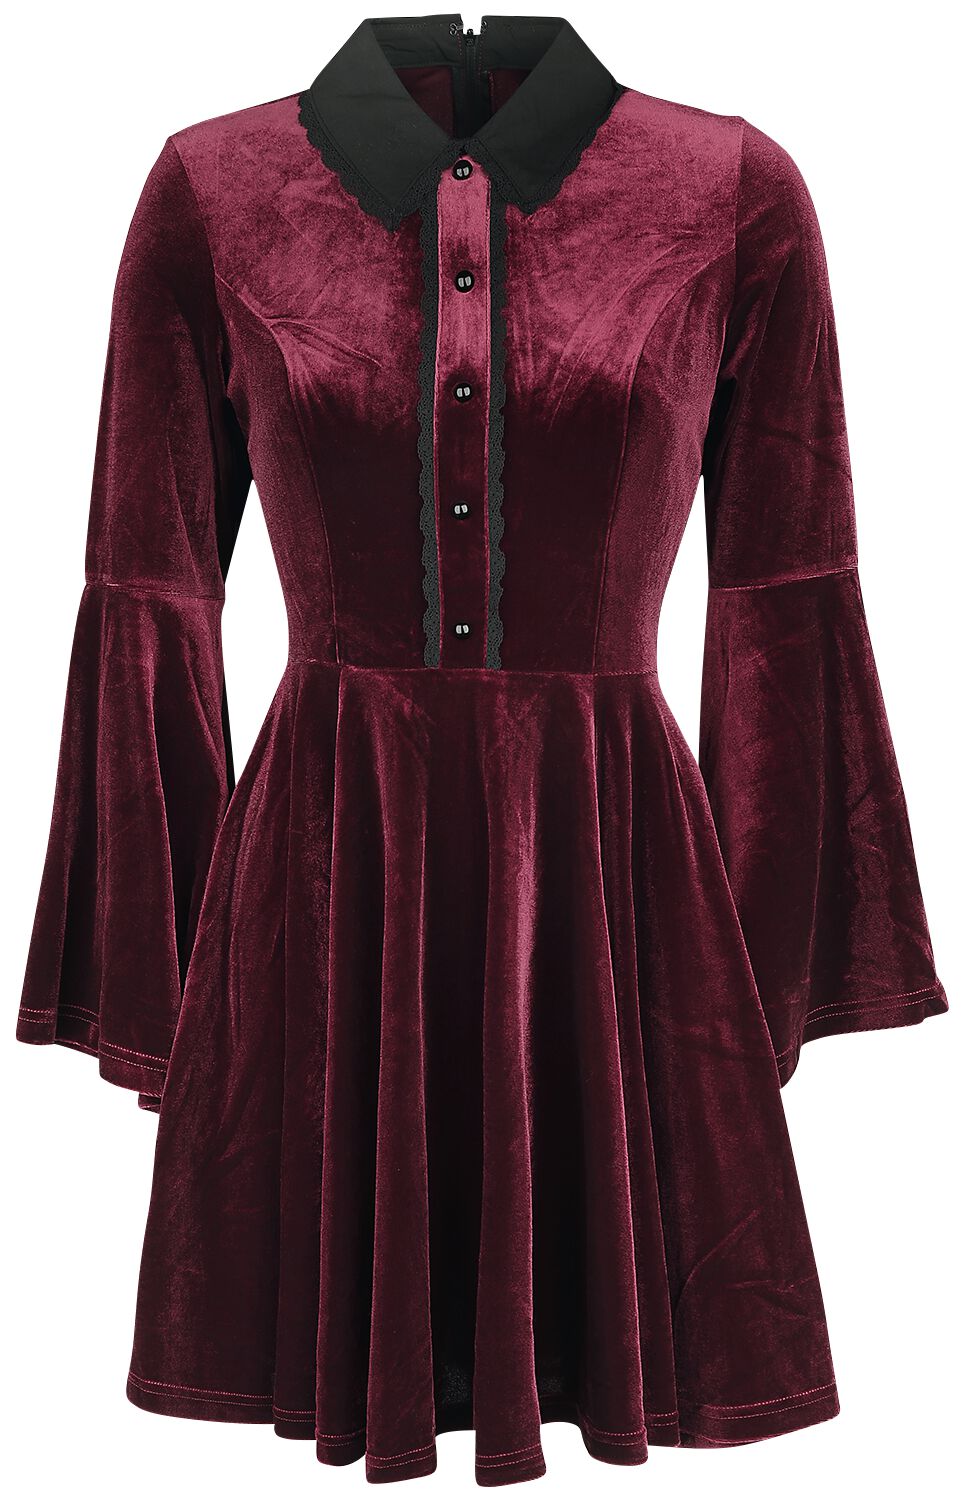 Image of Miniabito di Hell Bunny - Prudence Dress - XS a XL - Donna - bordeaux